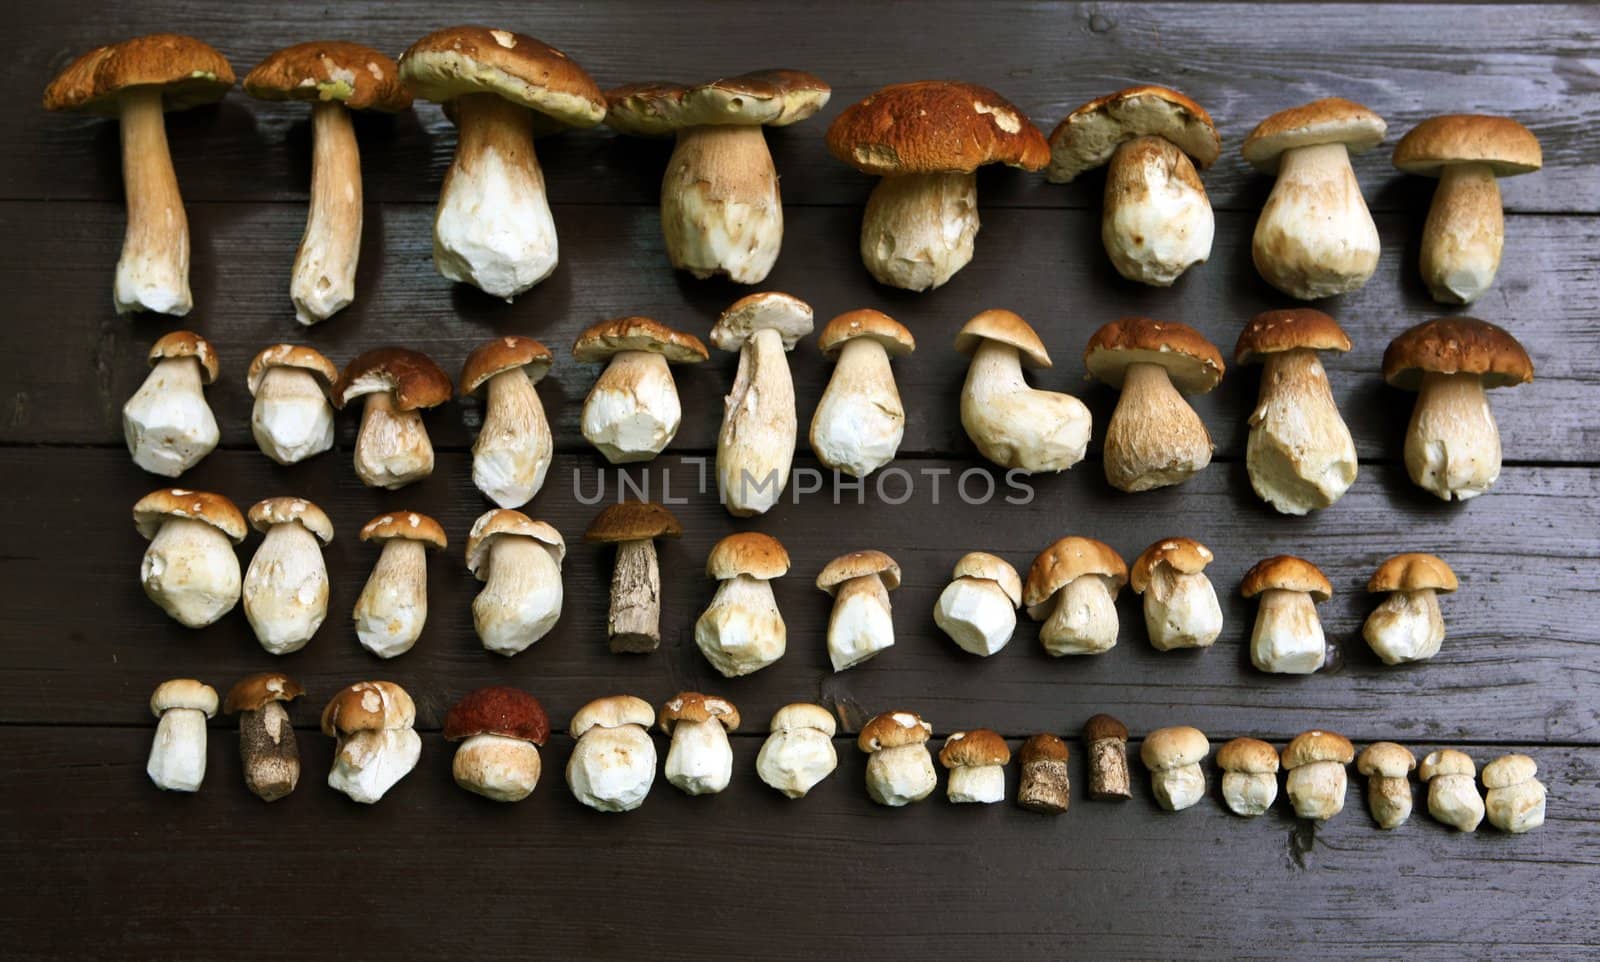 Tasty collected mushrooms by haak78